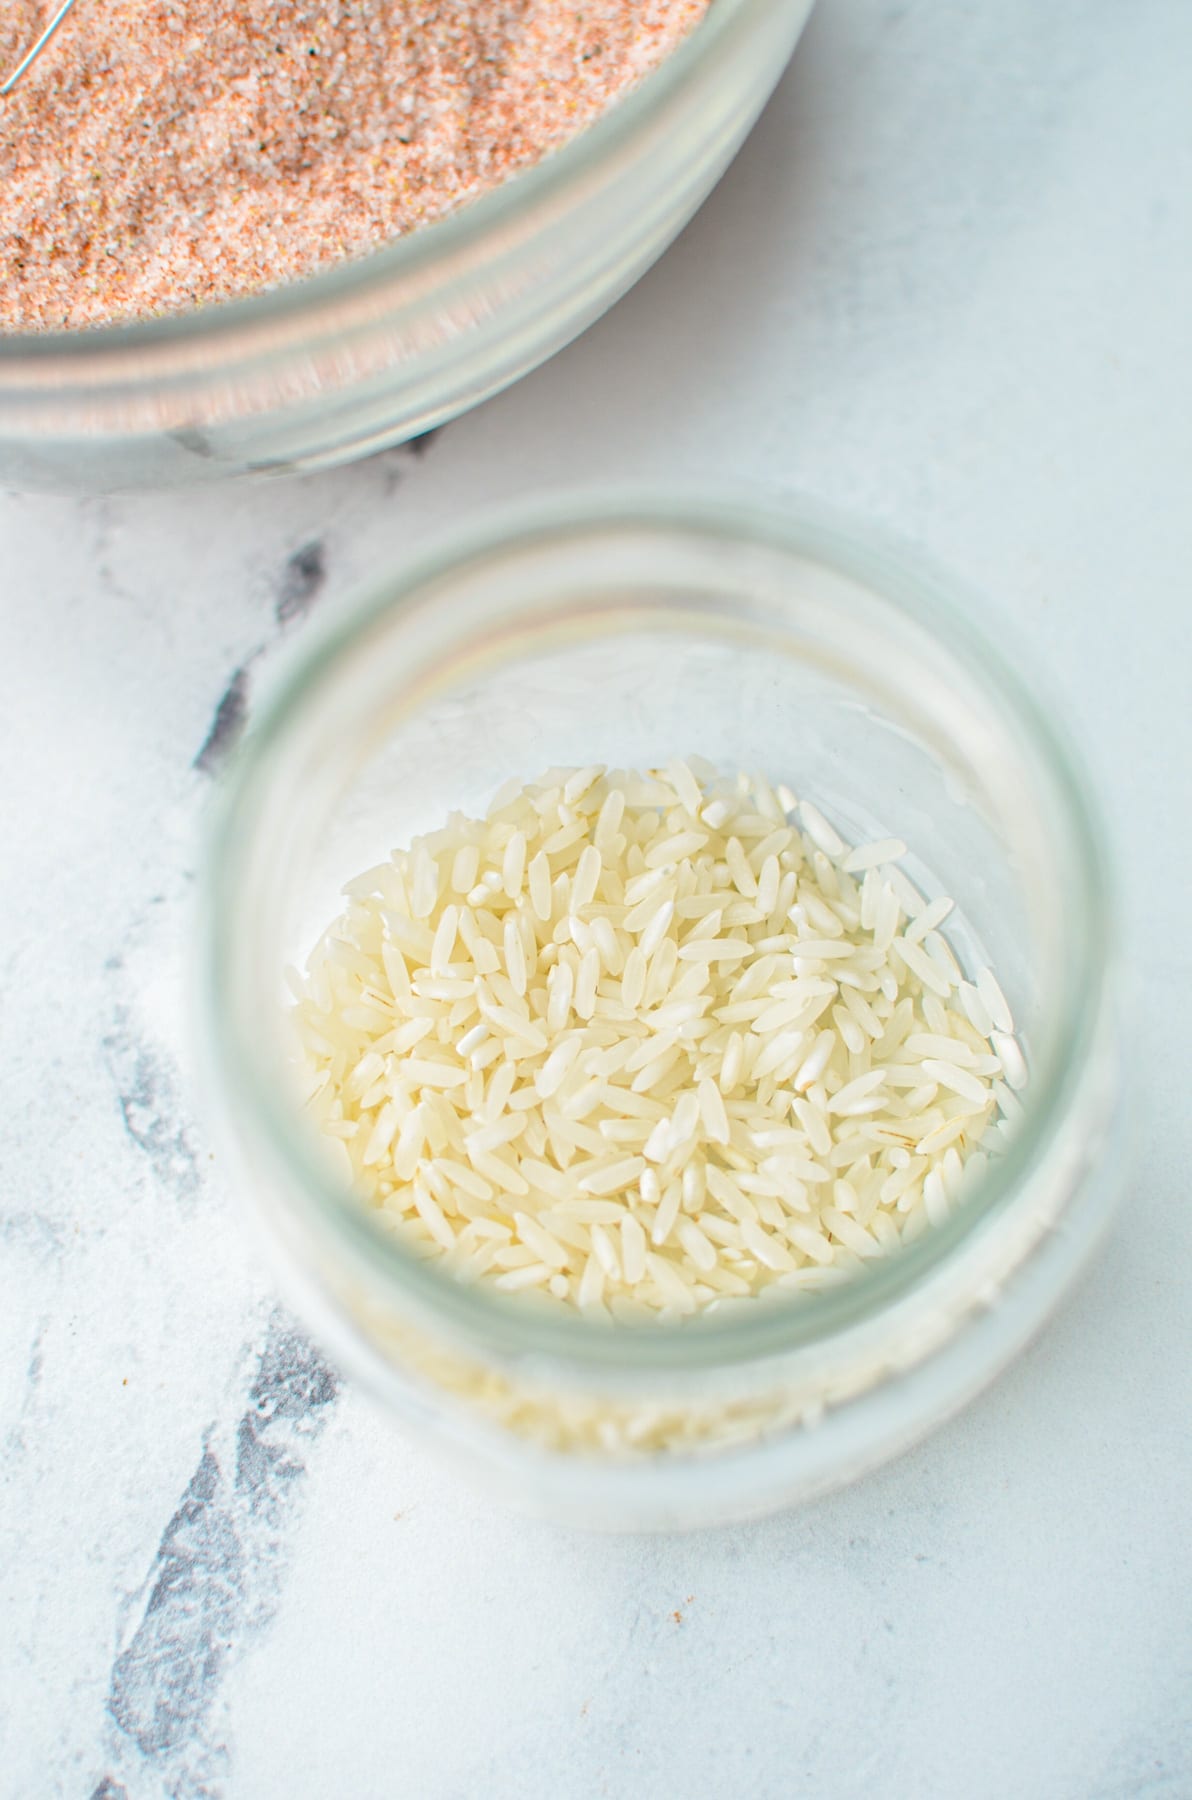 A jar of rice to prevent clumping in homemade seasoning blends.